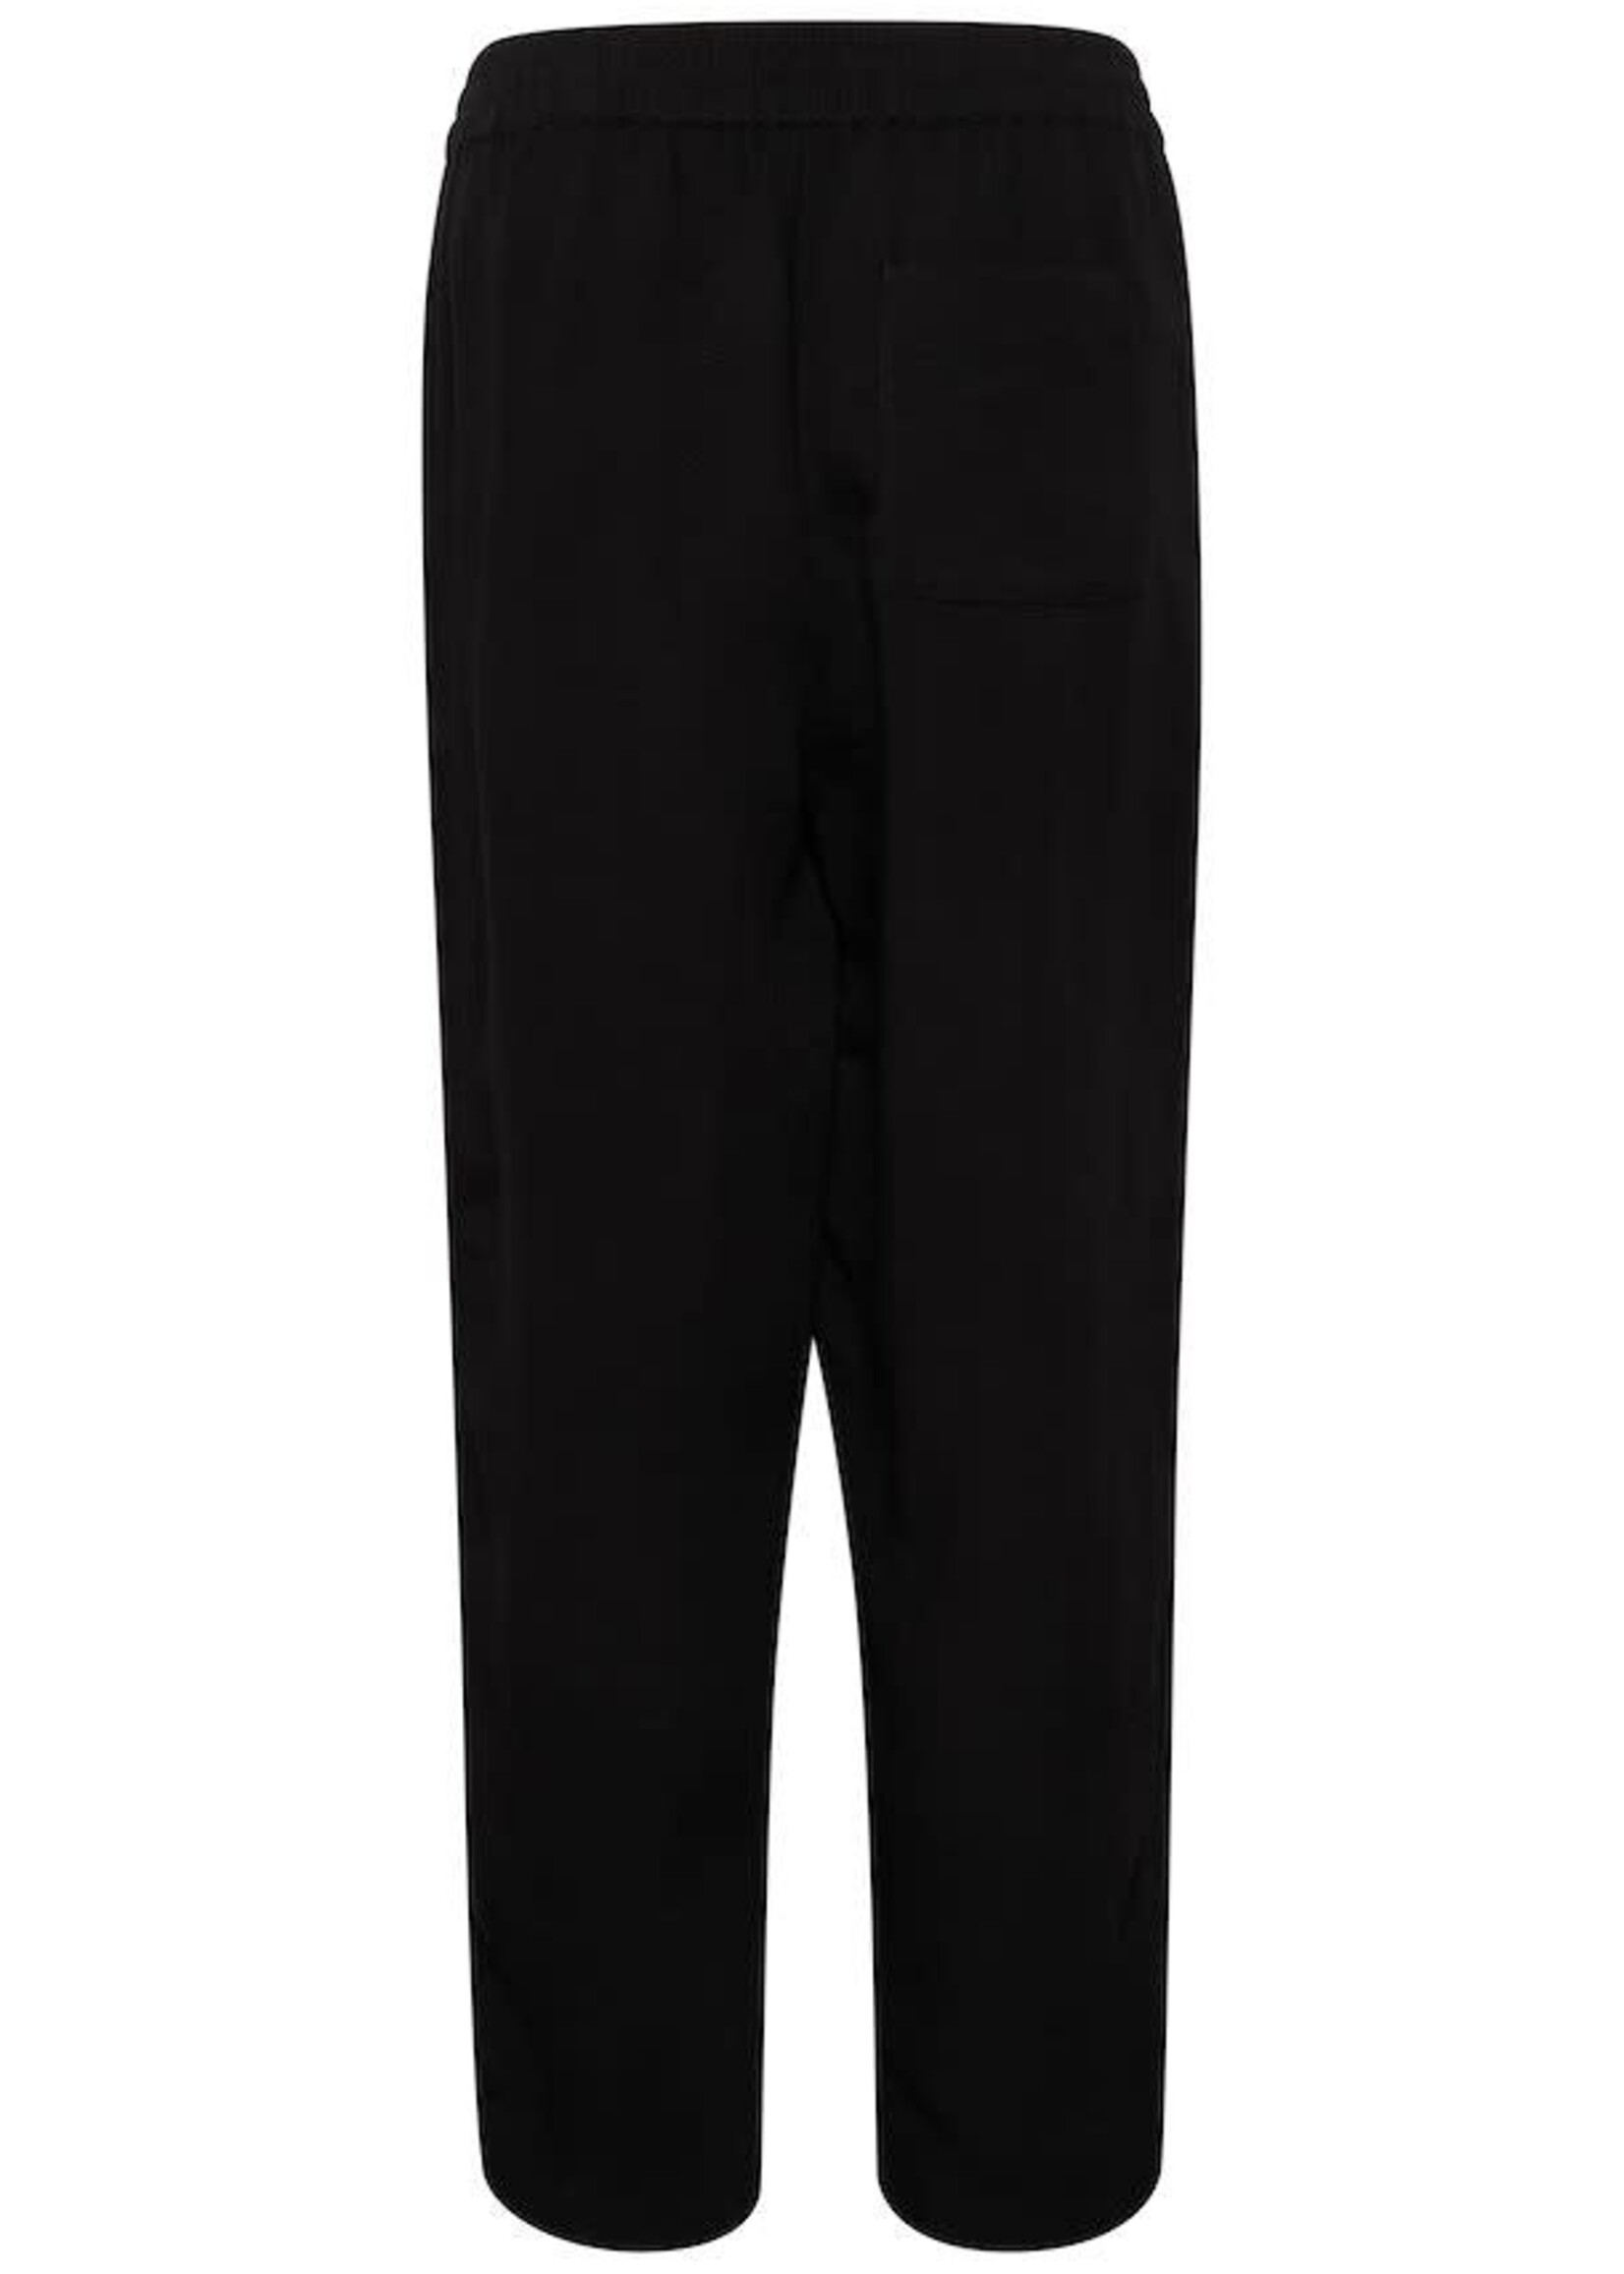 Shirley Tapered Trouser - Evelyn Lane Clothing Co.